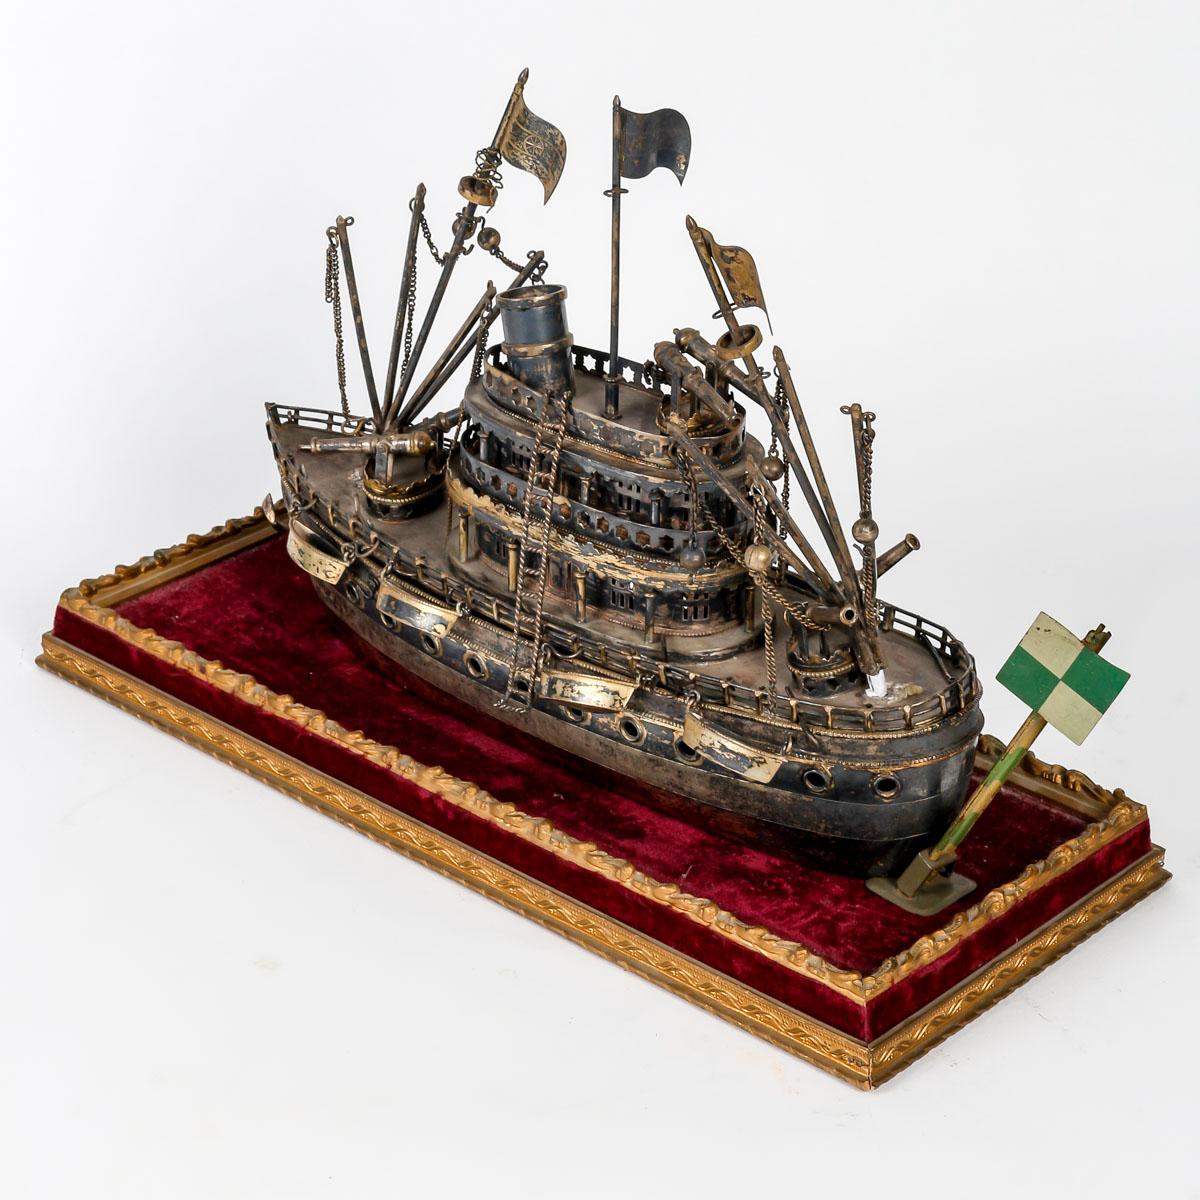 Miniature Army Boat in Sterling Silver, 19th Century, English Work. For Sale 1